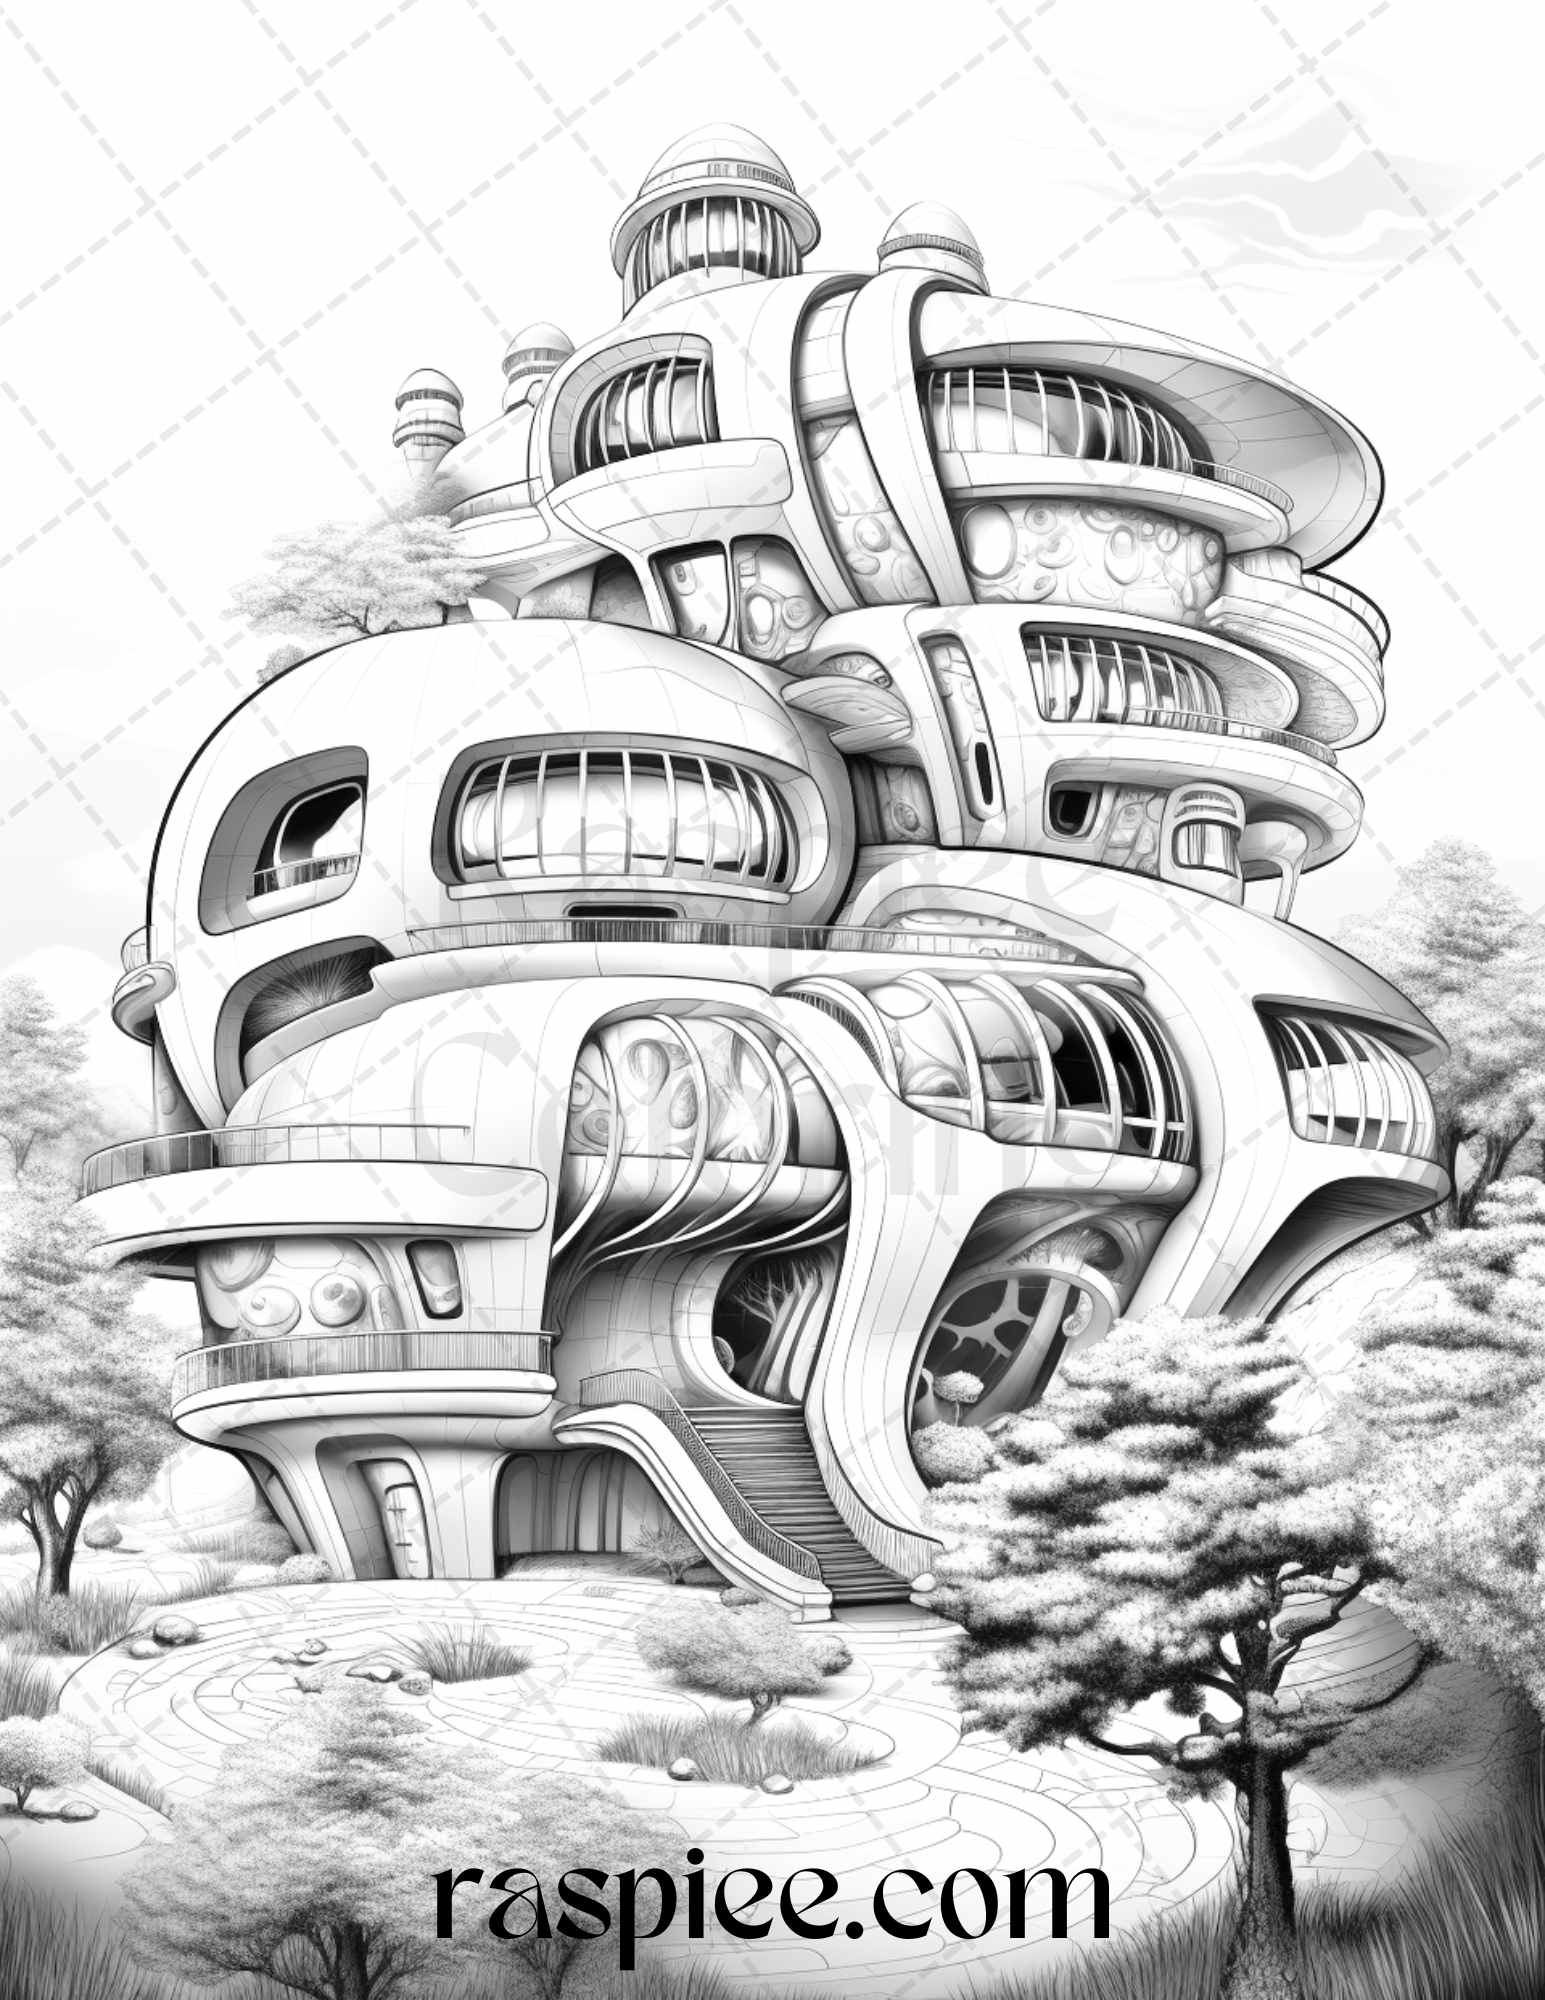 43 Futuristic Houses Grayscale Coloring Pages Printable for Adults, PDF File Instant Download - Raspiee Coloring